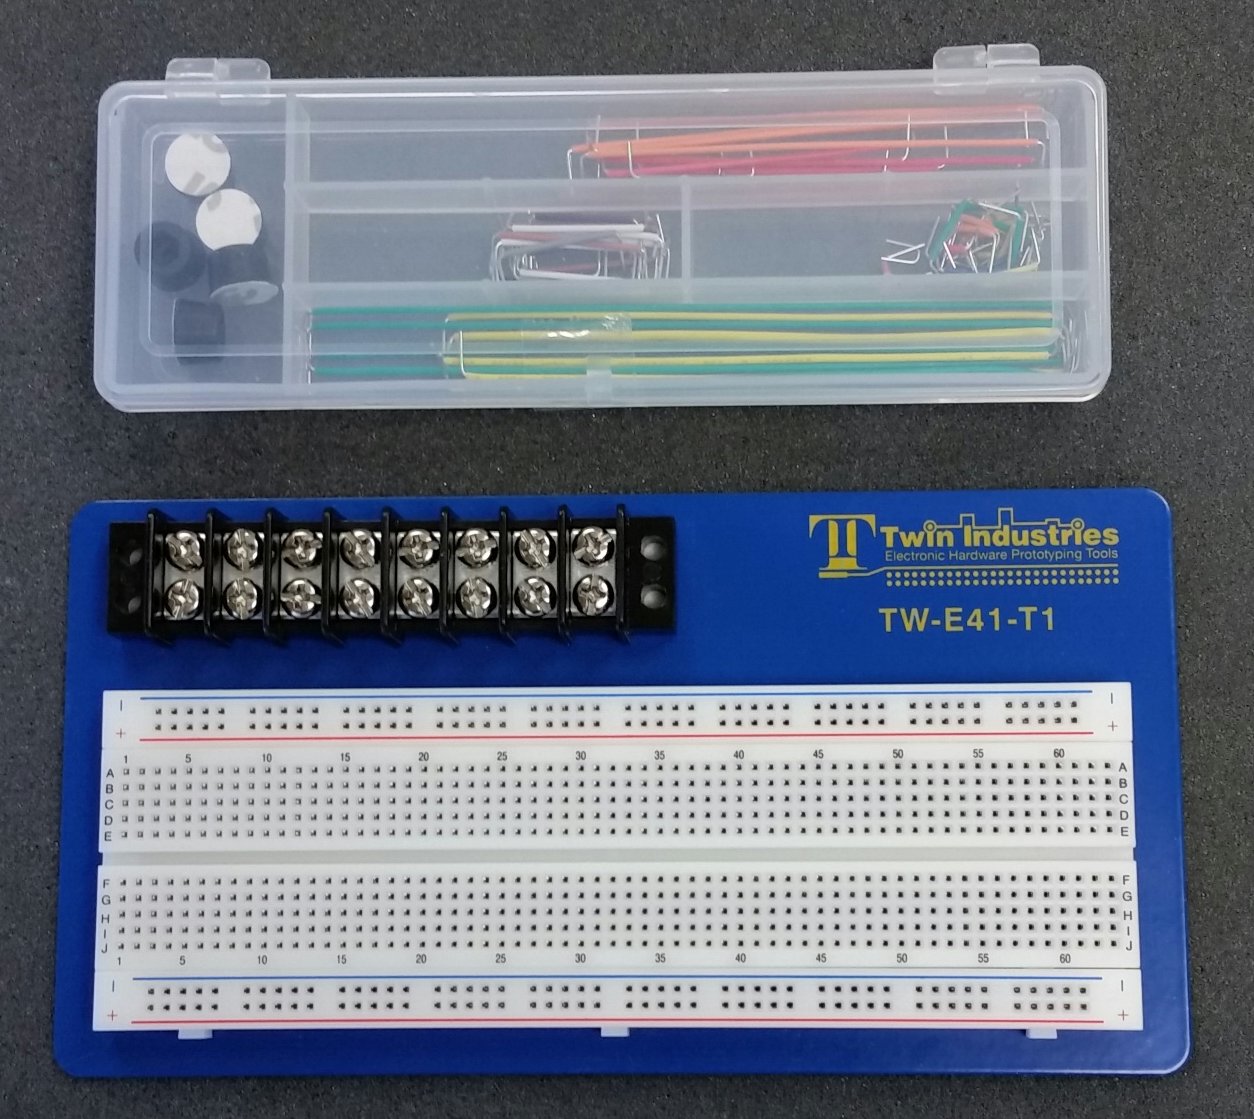 Prototyping Boards